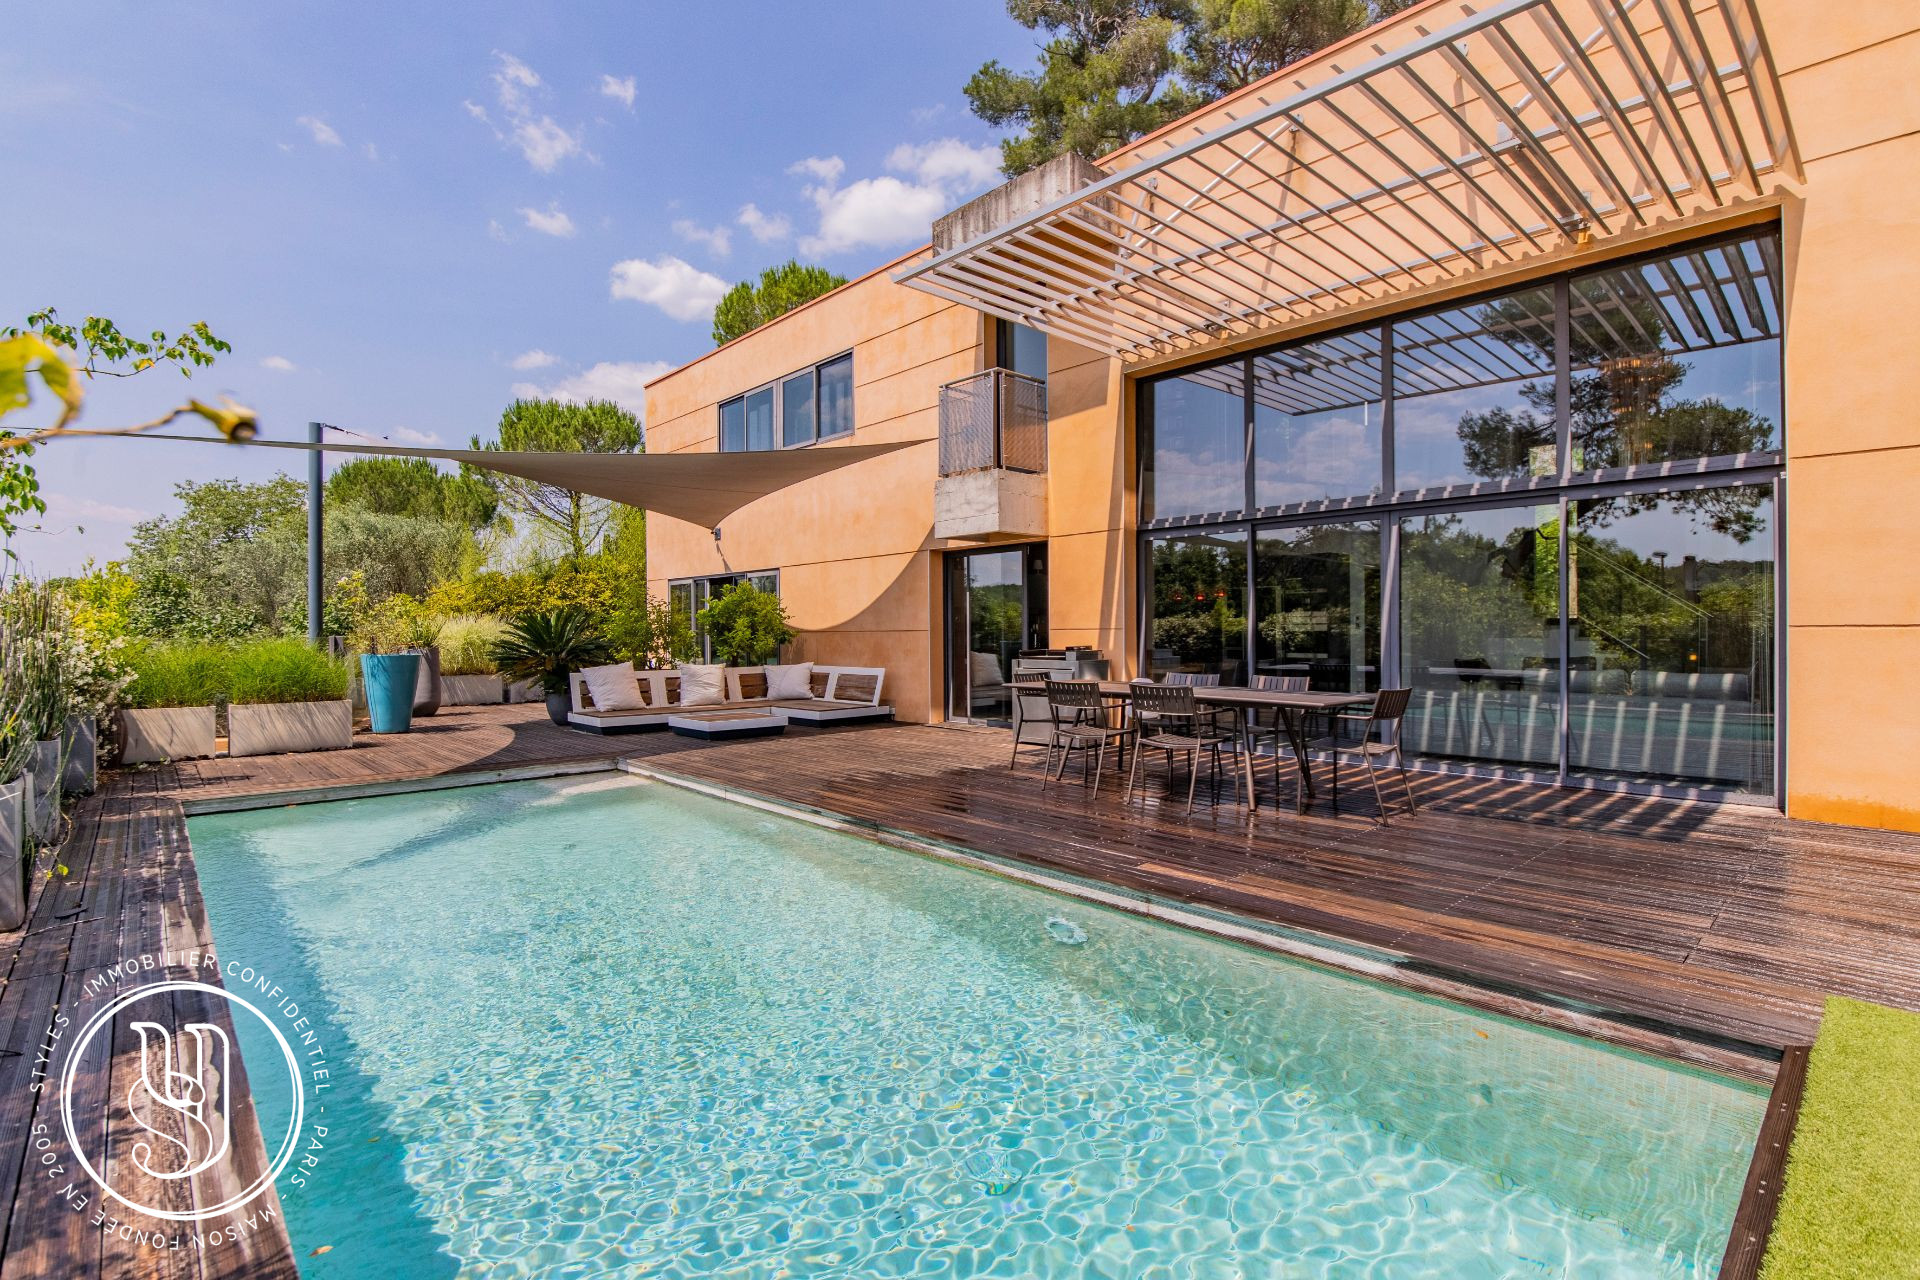 Montpellier - under offer, house and swimming pool - image 3